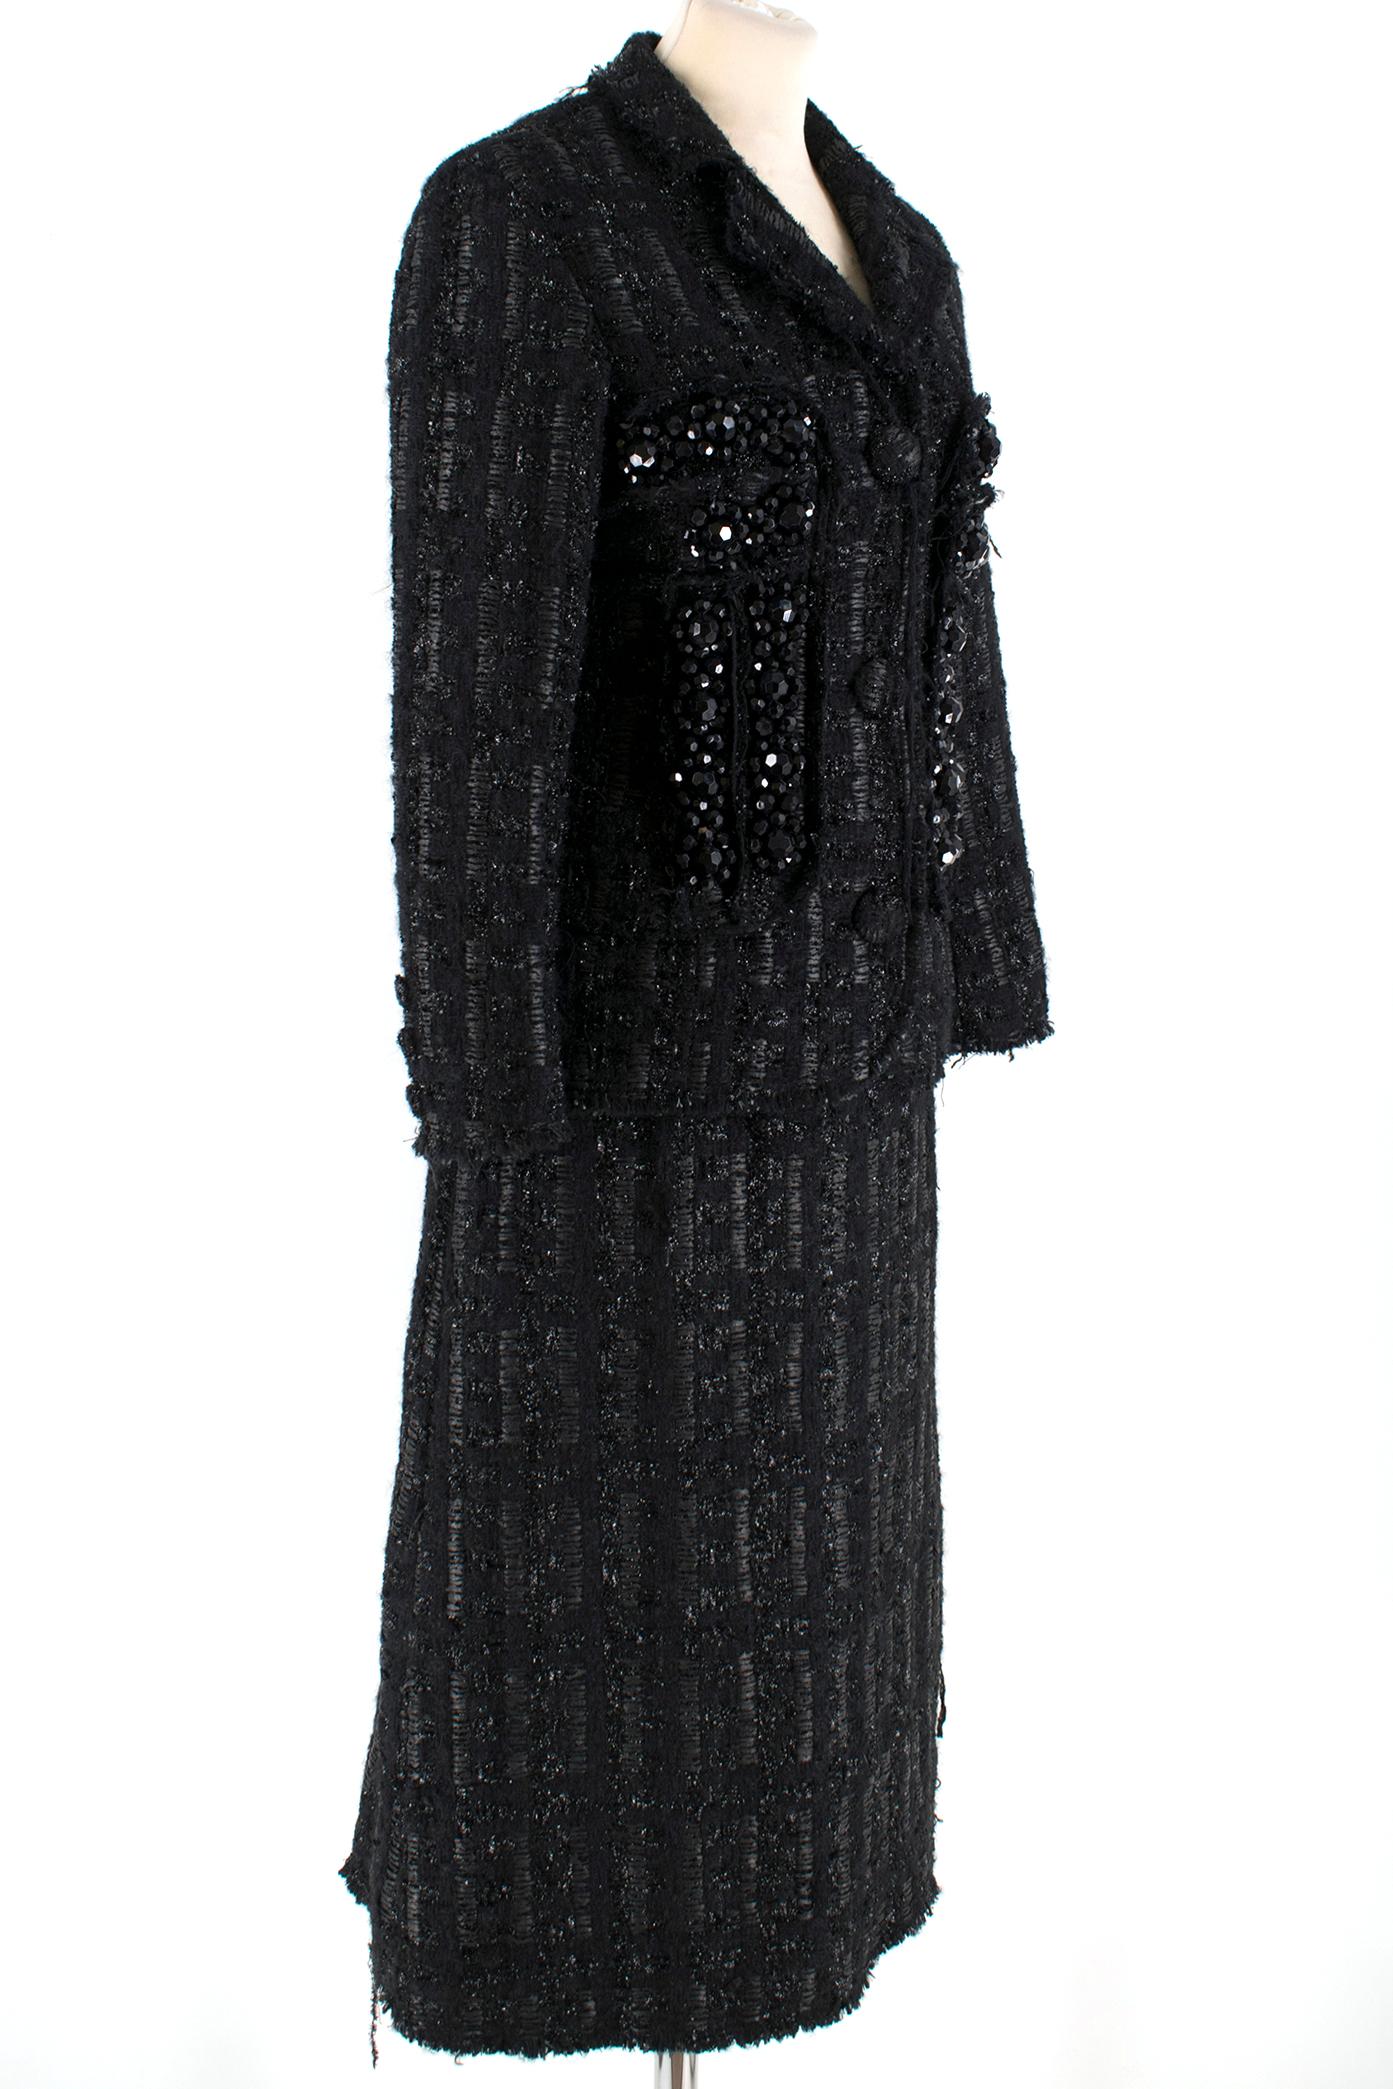 Women's Simone Rocha Crystal-Embroidered Black Tweed Coat & Skirt - Size US 0-2 For Sale